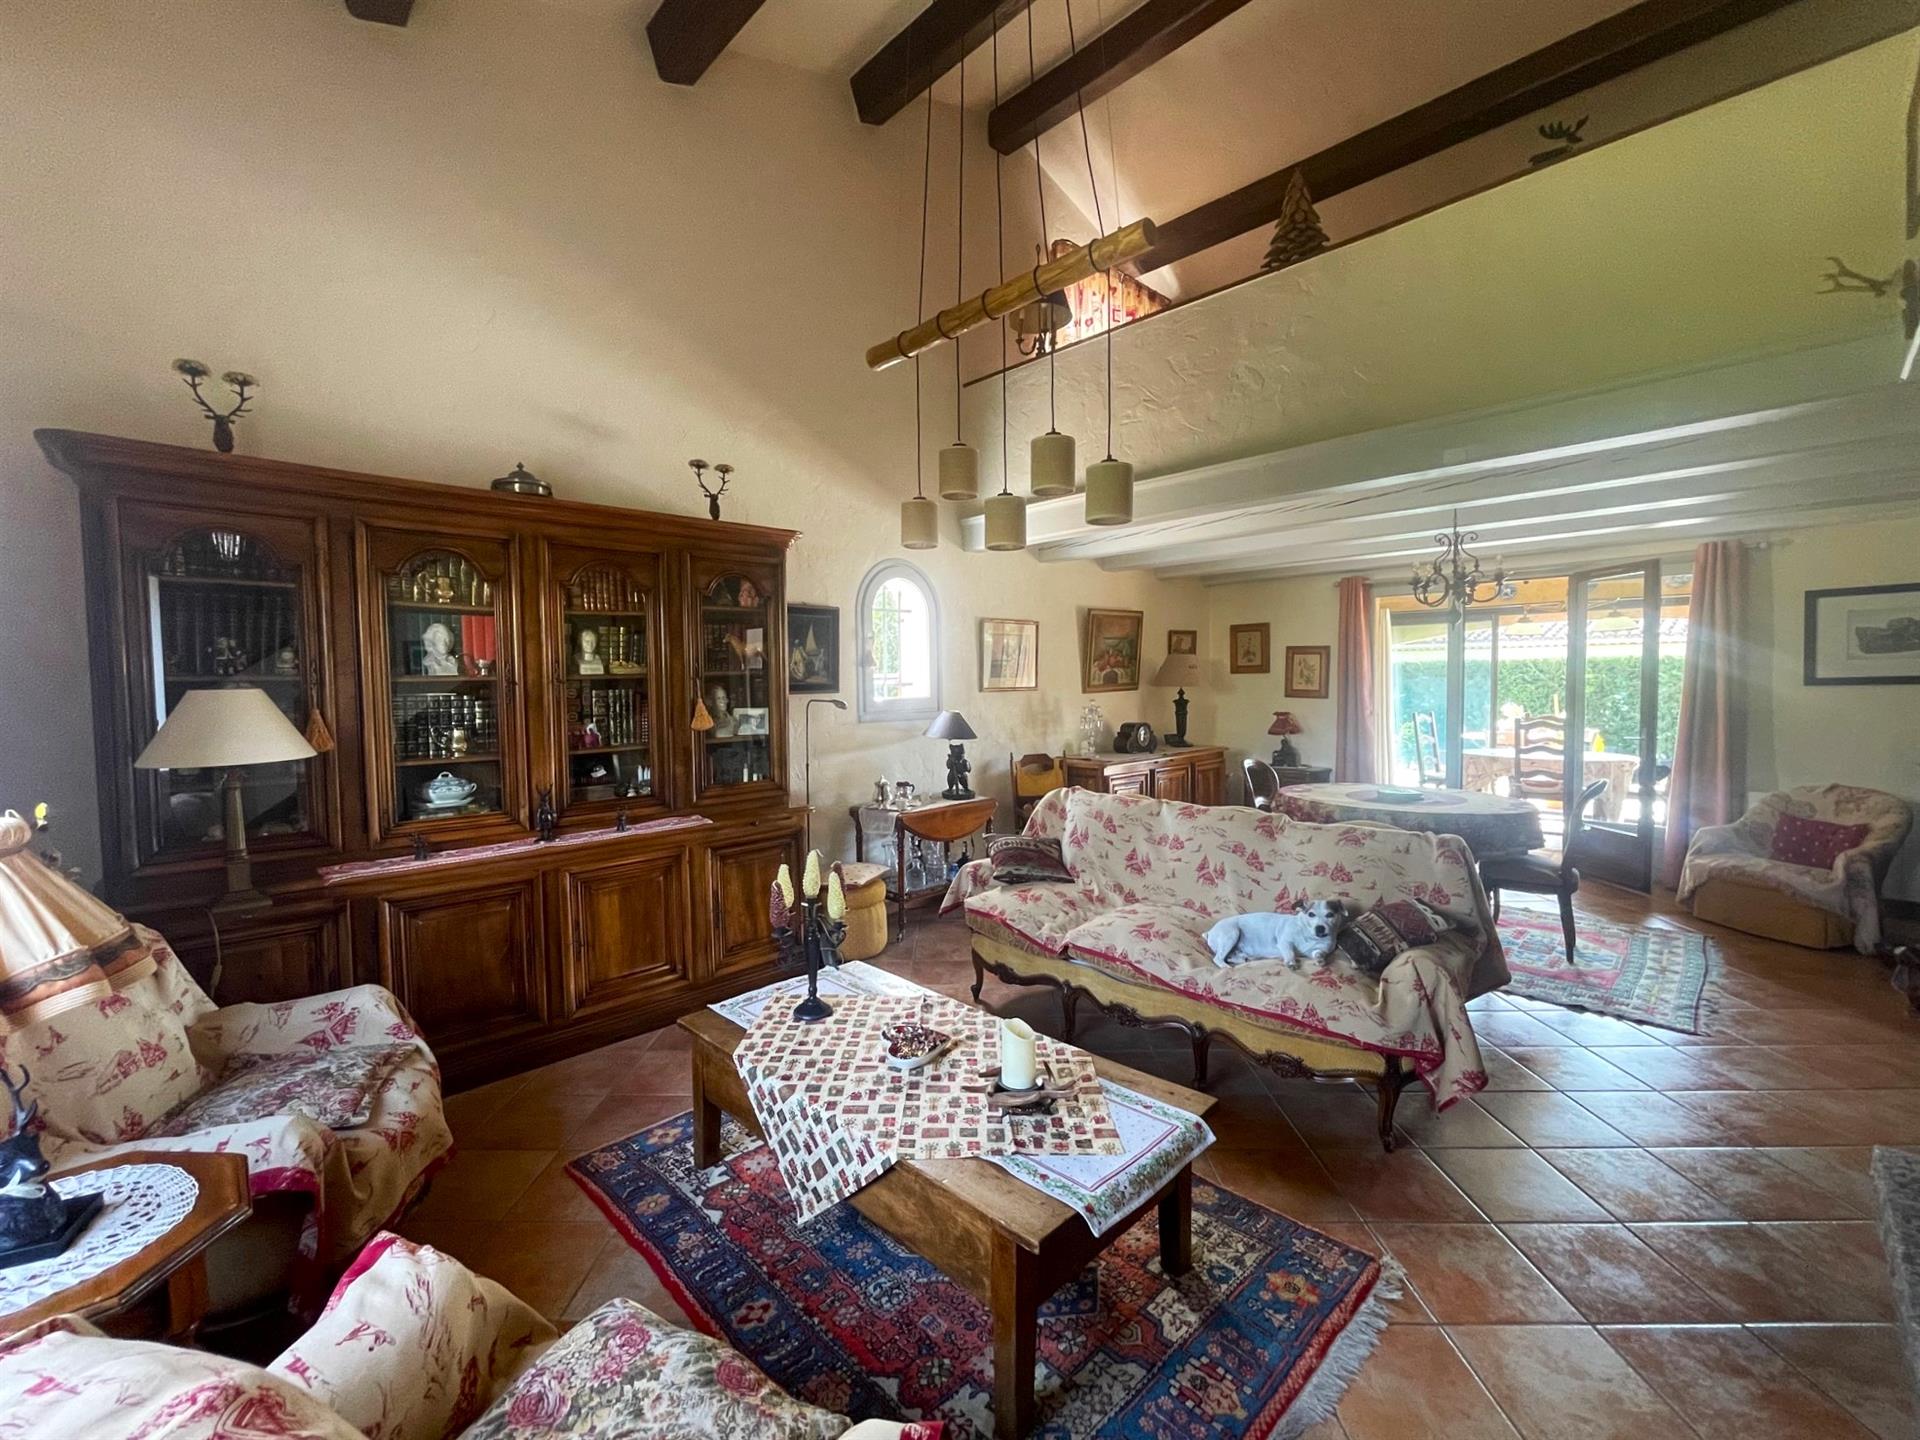 Pretty traditional villa with 4 bedrooms, swimming pool, garage, in a quiet location close to the vi